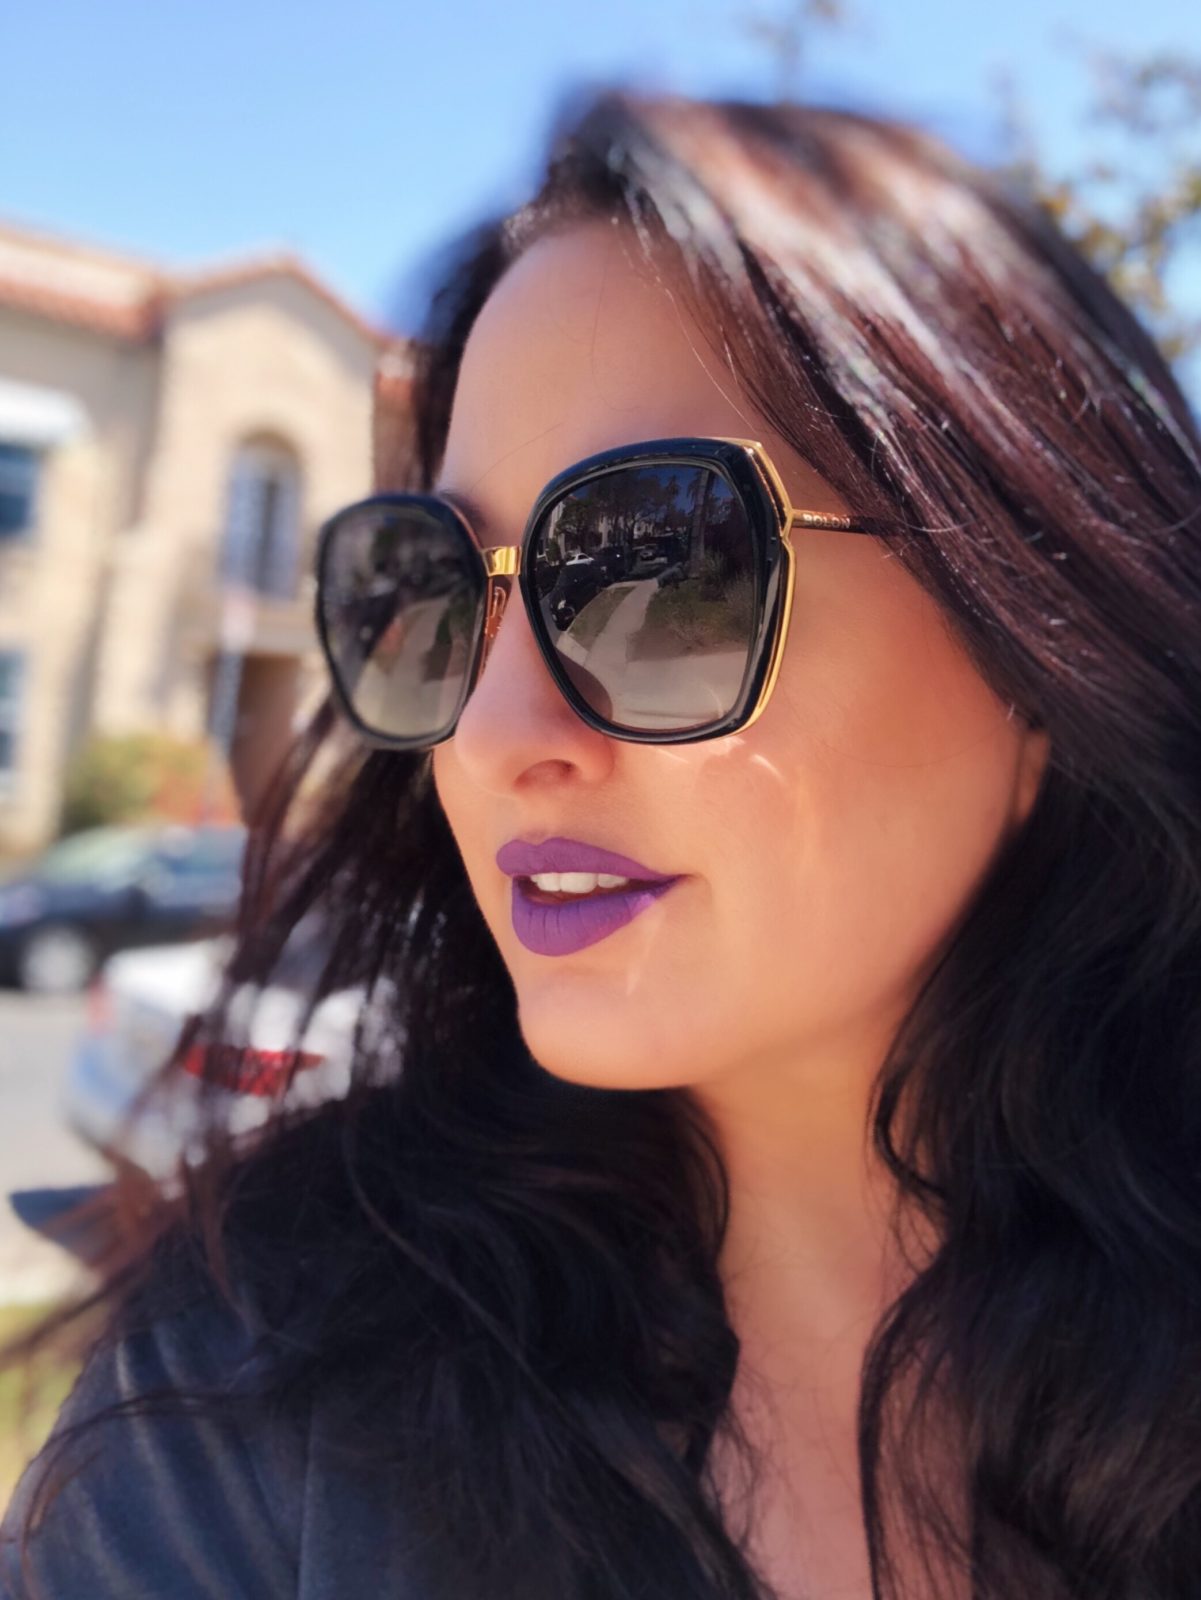 Bolon 6017 Sunglasses Review by Popular Los Angeles Lifestyle Blogger, My Beauty Bunny - My New Specs and Shades From Coastal Eyewear featured by popular Los Angeles style blogger, My Beauty Bunny